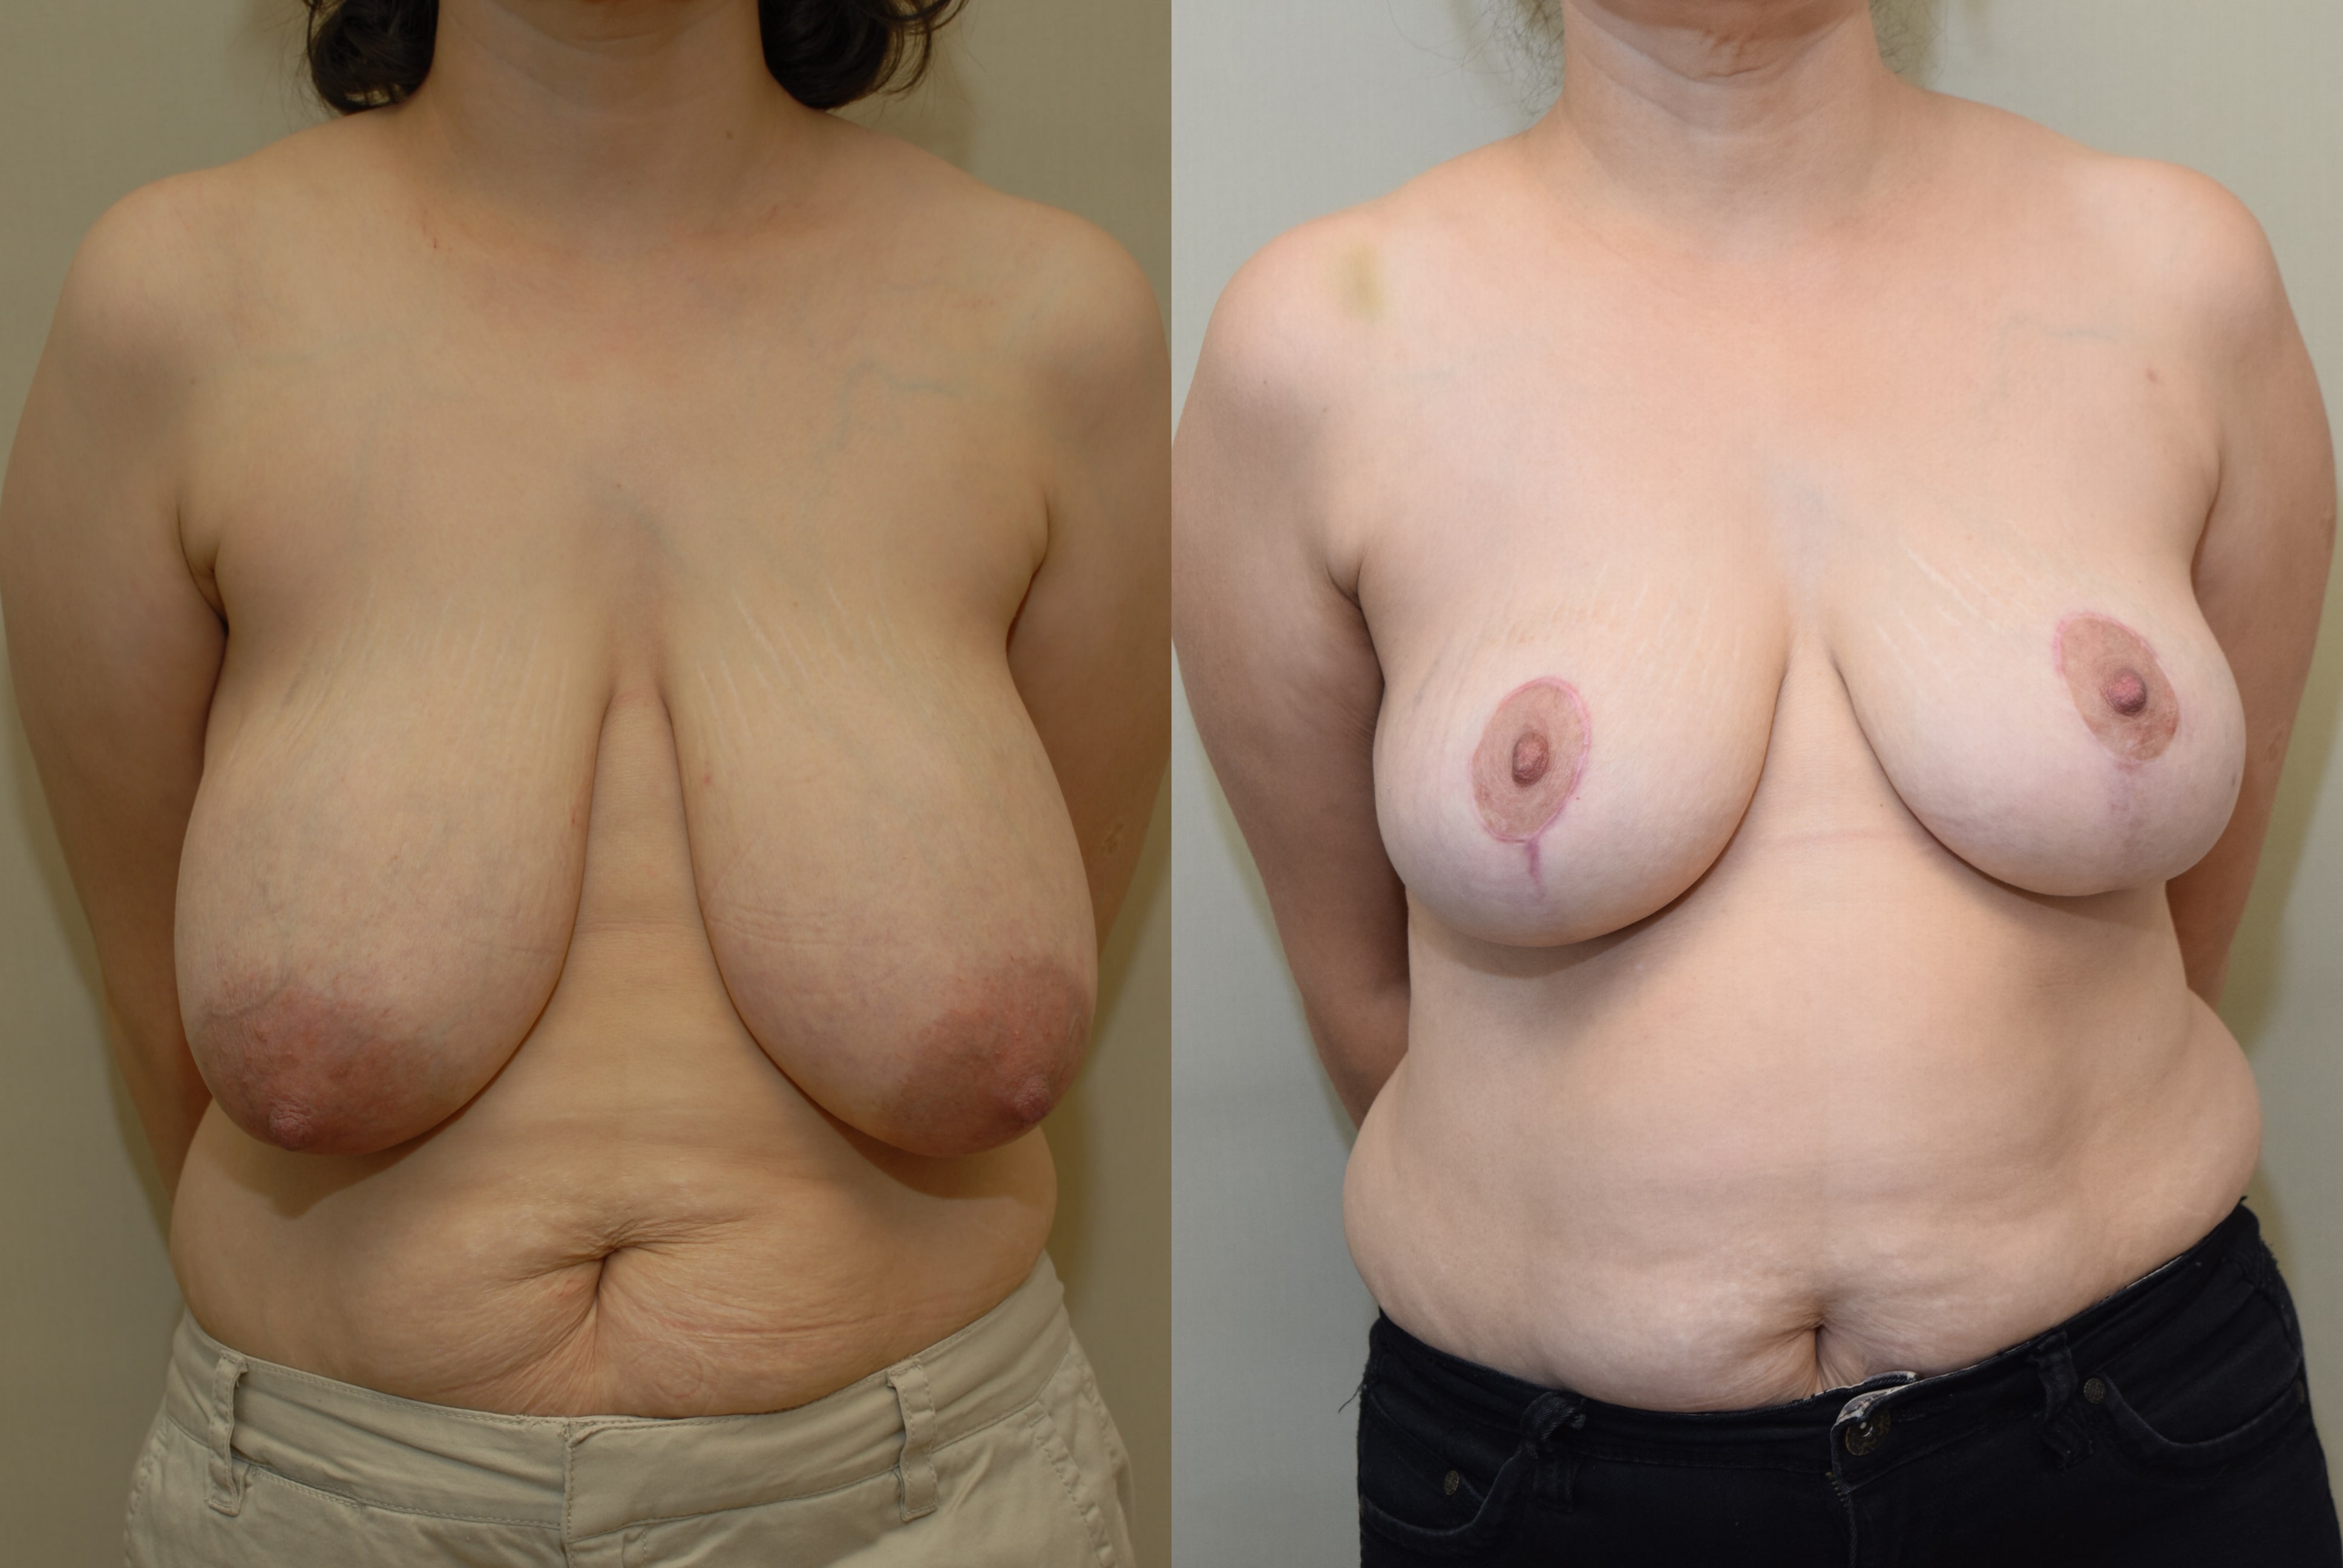 Breast Reduction Gallery.